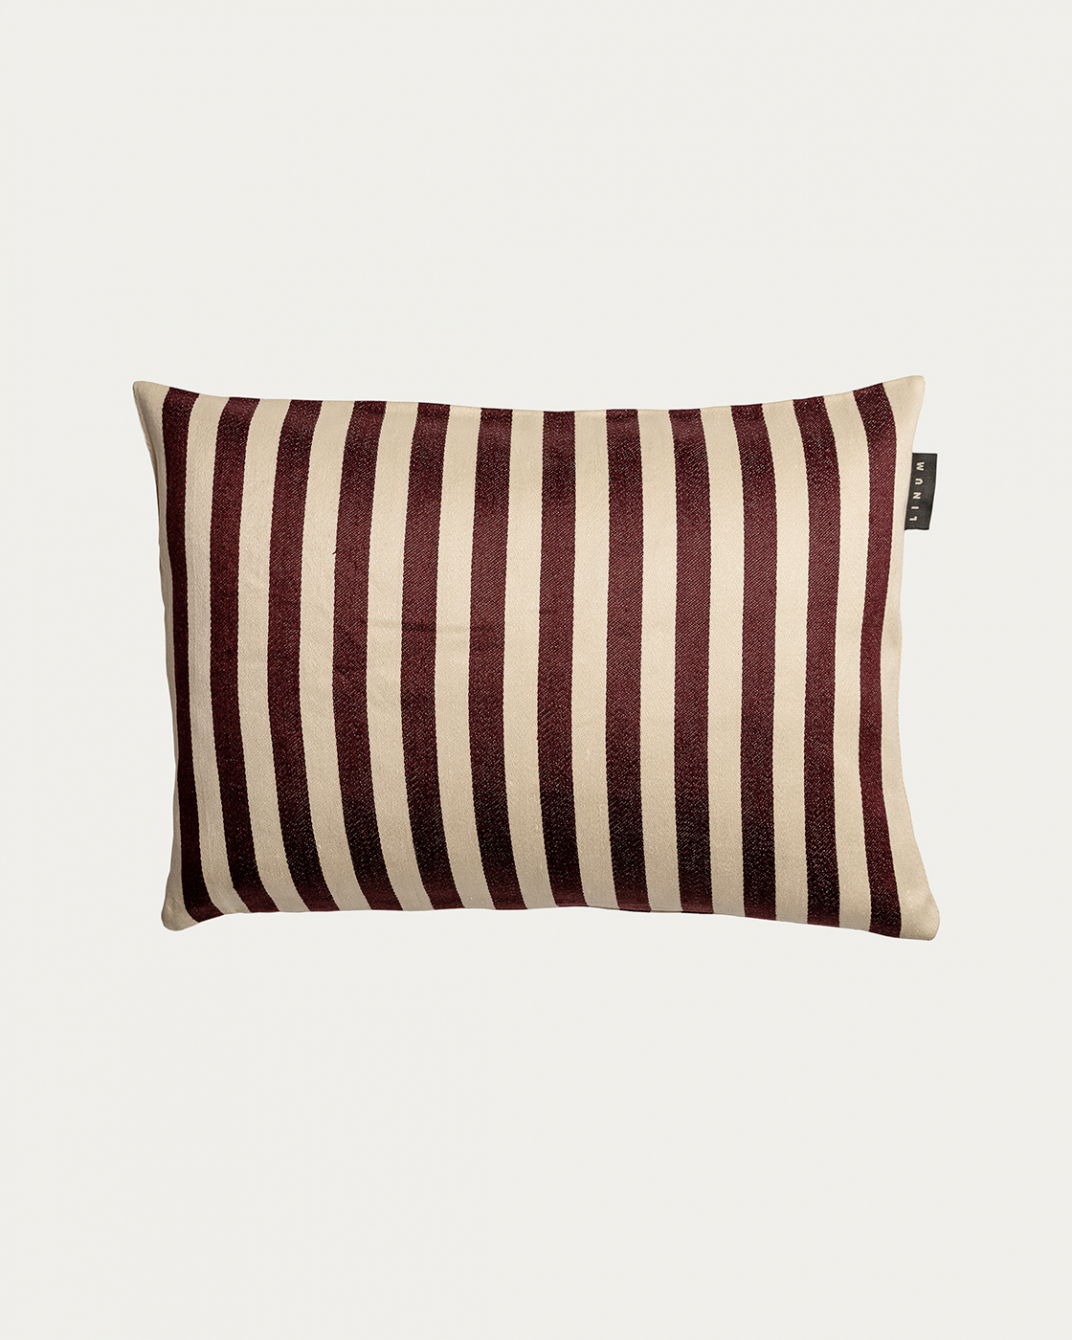 Product image dark burgundy red AMALFI cushion cover with wide stripes made of 77% linen and 23% cotton from LINUM DESIGN. Size 35x50 cm.